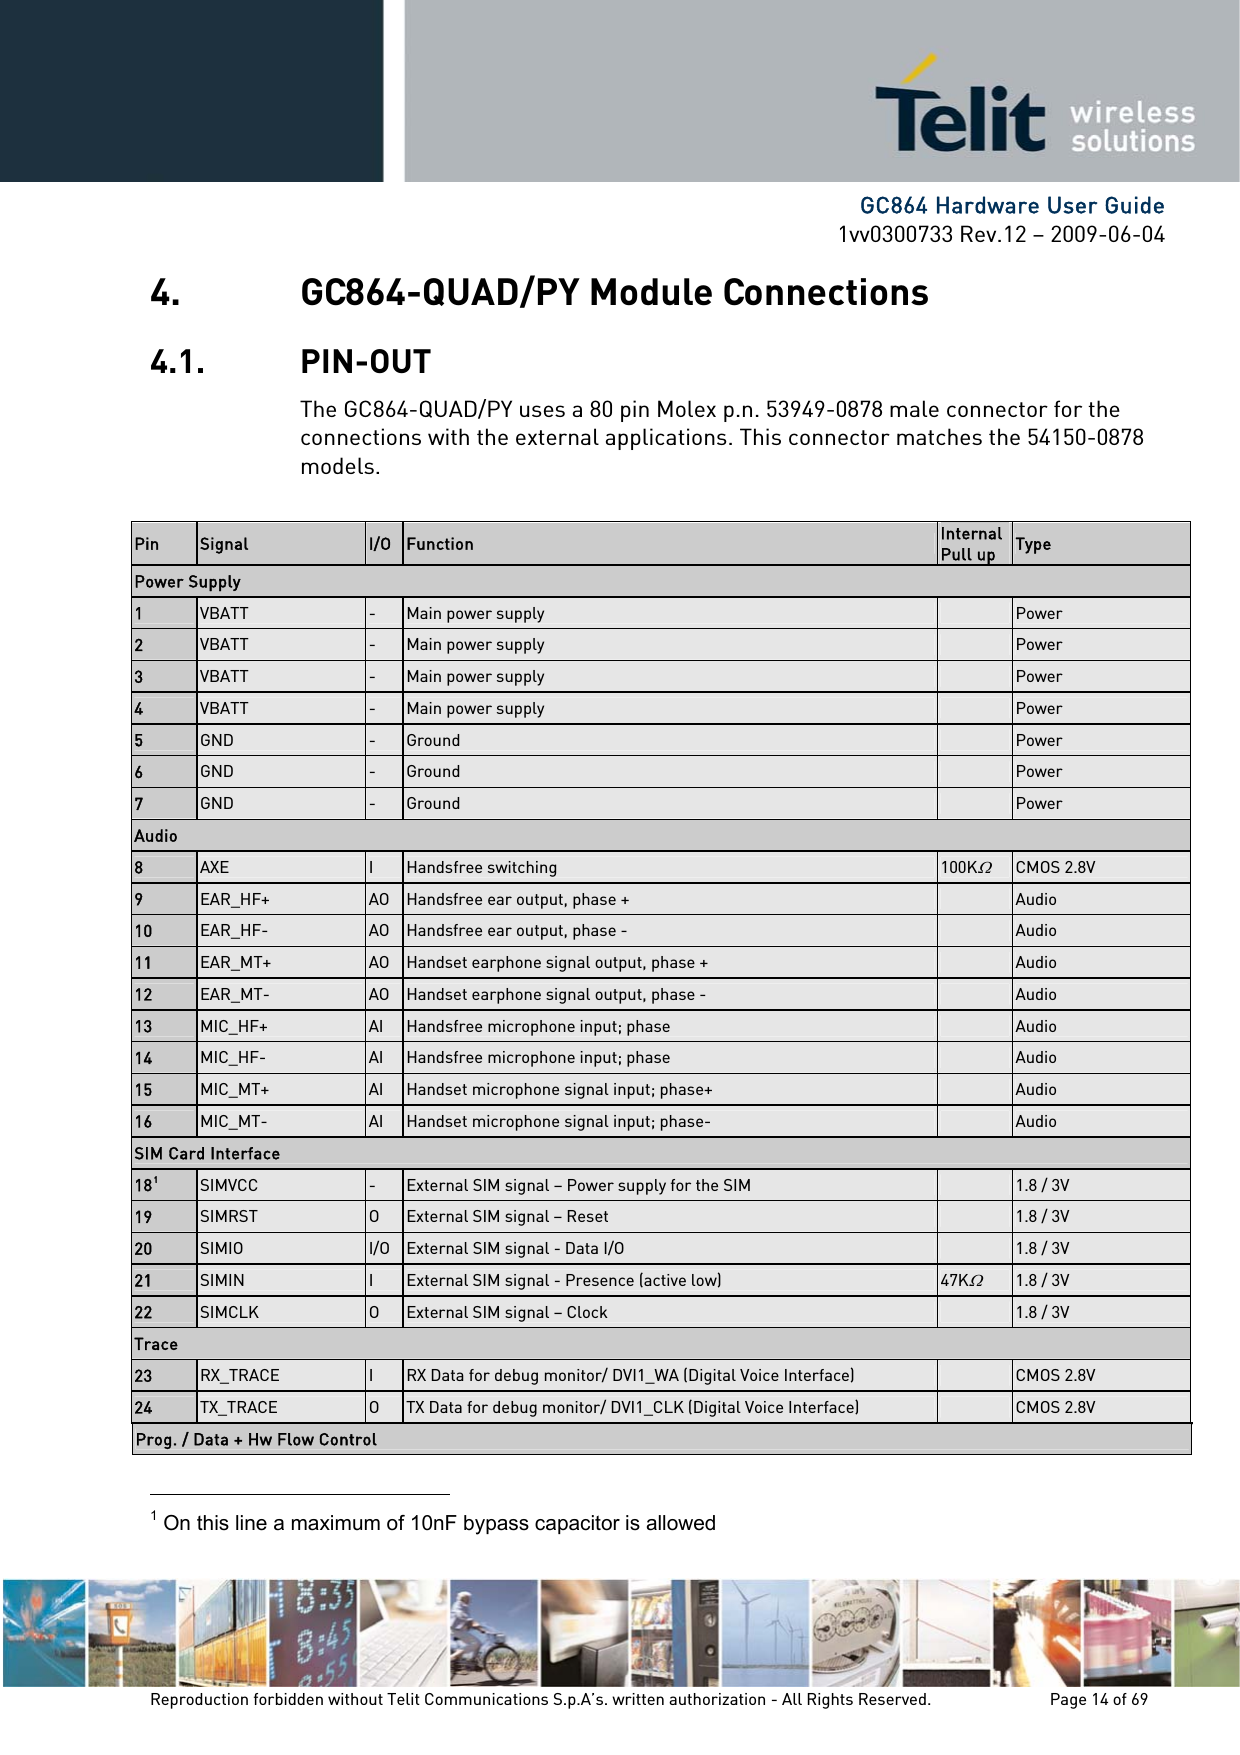      GC864 Hardware User Guide 1vv0300733 Rev.12 – 2009-06-04 Reproduction forbidden without Telit Communications S.p.A’s. written authorization - All Rights Reserved.    Page 14 of 69  4. GC864-QUAD/PY Module Connections 4.1. PIN-OUT The GC864-QUAD/PY uses a 80 pin Molex p.n. 53949-0878 male connector for the connections with the external applications. This connector matches the 54150-0878 models.   Pin  Signal  I/O  Function  Internal Pull up  Type Power Supply 1  VBATT  -  Main power supply   Power 2  VBATT  -  Main power supply   Power 3  VBATT  -  Main power supply   Power 4  VBATT  -  Main power supply   Power 5  GND  -  Ground   Power 6  GND  -  Ground   Power 7  GND  -  Ground   Power Audio 8  AXE  I  Handsfree switching  100KΩ CMOS 2.8V 9  EAR_HF+  AO  Handsfree ear output, phase +   Audio 10  EAR_HF-  AO  Handsfree ear output, phase -   Audio 11  EAR_MT+  AO  Handset earphone signal output, phase +   Audio 12  EAR_MT-  AO  Handset earphone signal output, phase -   Audio 13  MIC_HF+  AI  Handsfree microphone input; phase   Audio 14  MIC_HF-  AI  Handsfree microphone input; phase   Audio 15  MIC_MT+  AI  Handset microphone signal input; phase+   Audio 16  MIC_MT-  AI  Handset microphone signal input; phase-   Audio SIM Card Interface 181 SIMVCC  -  External SIM signal – Power supply for the SIM   1.8 / 3V 19  SIMRST  O  External SIM signal – Reset   1.8 / 3V 20  SIMIO  I/O  External SIM signal - Data I/O   1.8 / 3V 21  SIMIN  I  External SIM signal - Presence (active low)  47KΩ 1.8 / 3V 22  SIMCLK  O  External SIM signal – Clock   1.8 / 3V Trace 23  RX_TRACE  I  RX Data for debug monitor/ DVI1_WA (Digital Voice Interface)   CMOS 2.8V 24  TX_TRACE  O  TX Data for debug monitor/ DVI1_CLK (Digital Voice Interface)   CMOS 2.8V Prog. / Data + Hw Flow Control                                                       1 On this line a maximum of 10nF bypass capacitor is allowed 